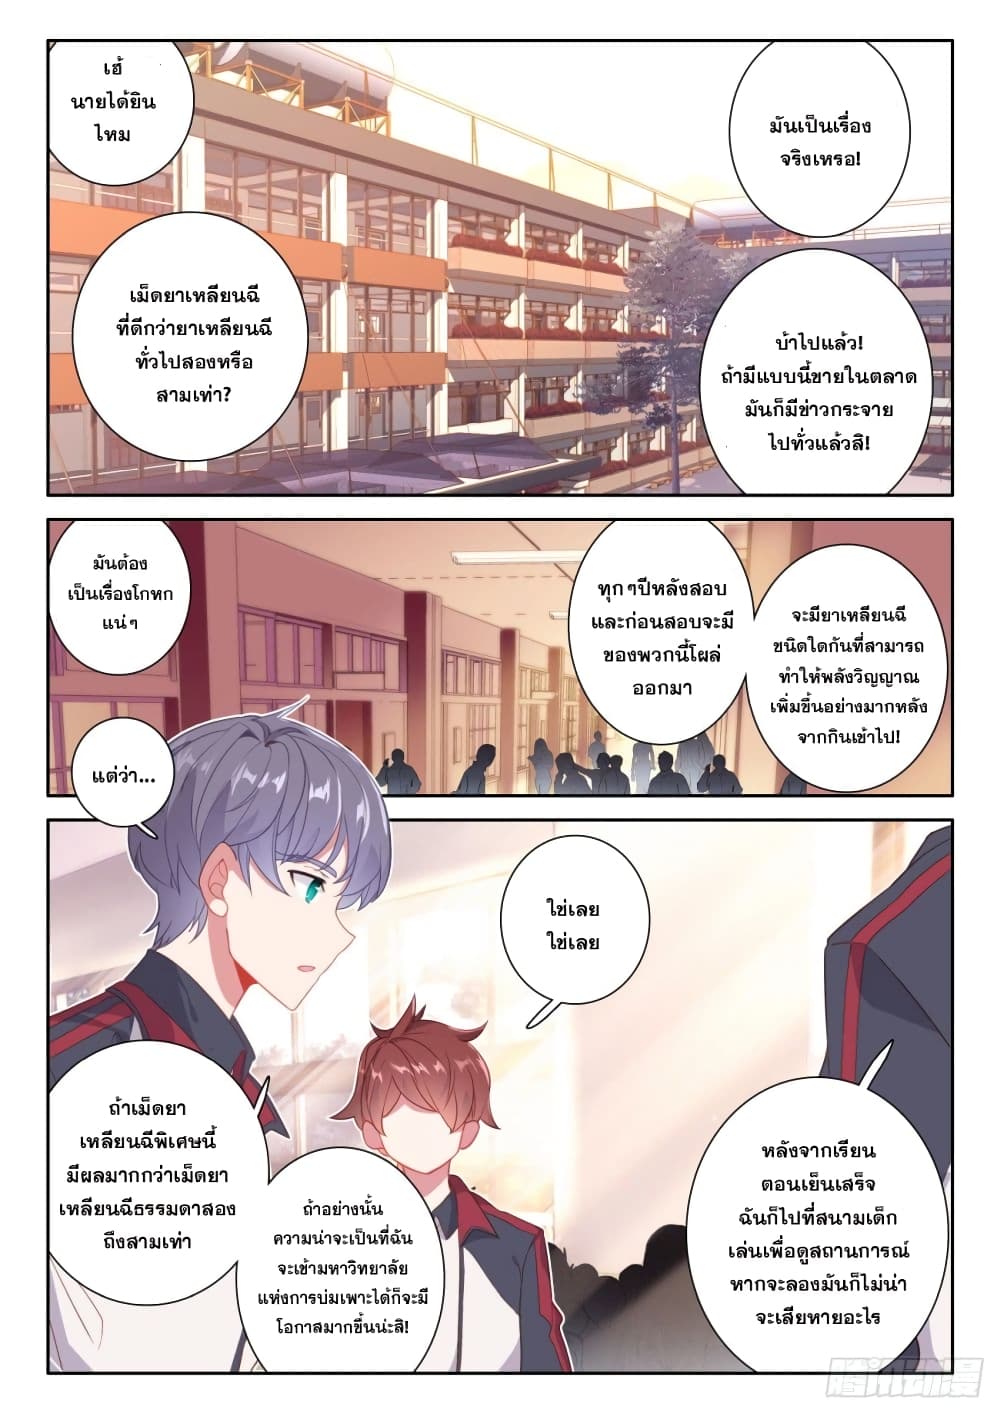 Becoming Immortal by Paying Cash ตอนที่ 4 (14)